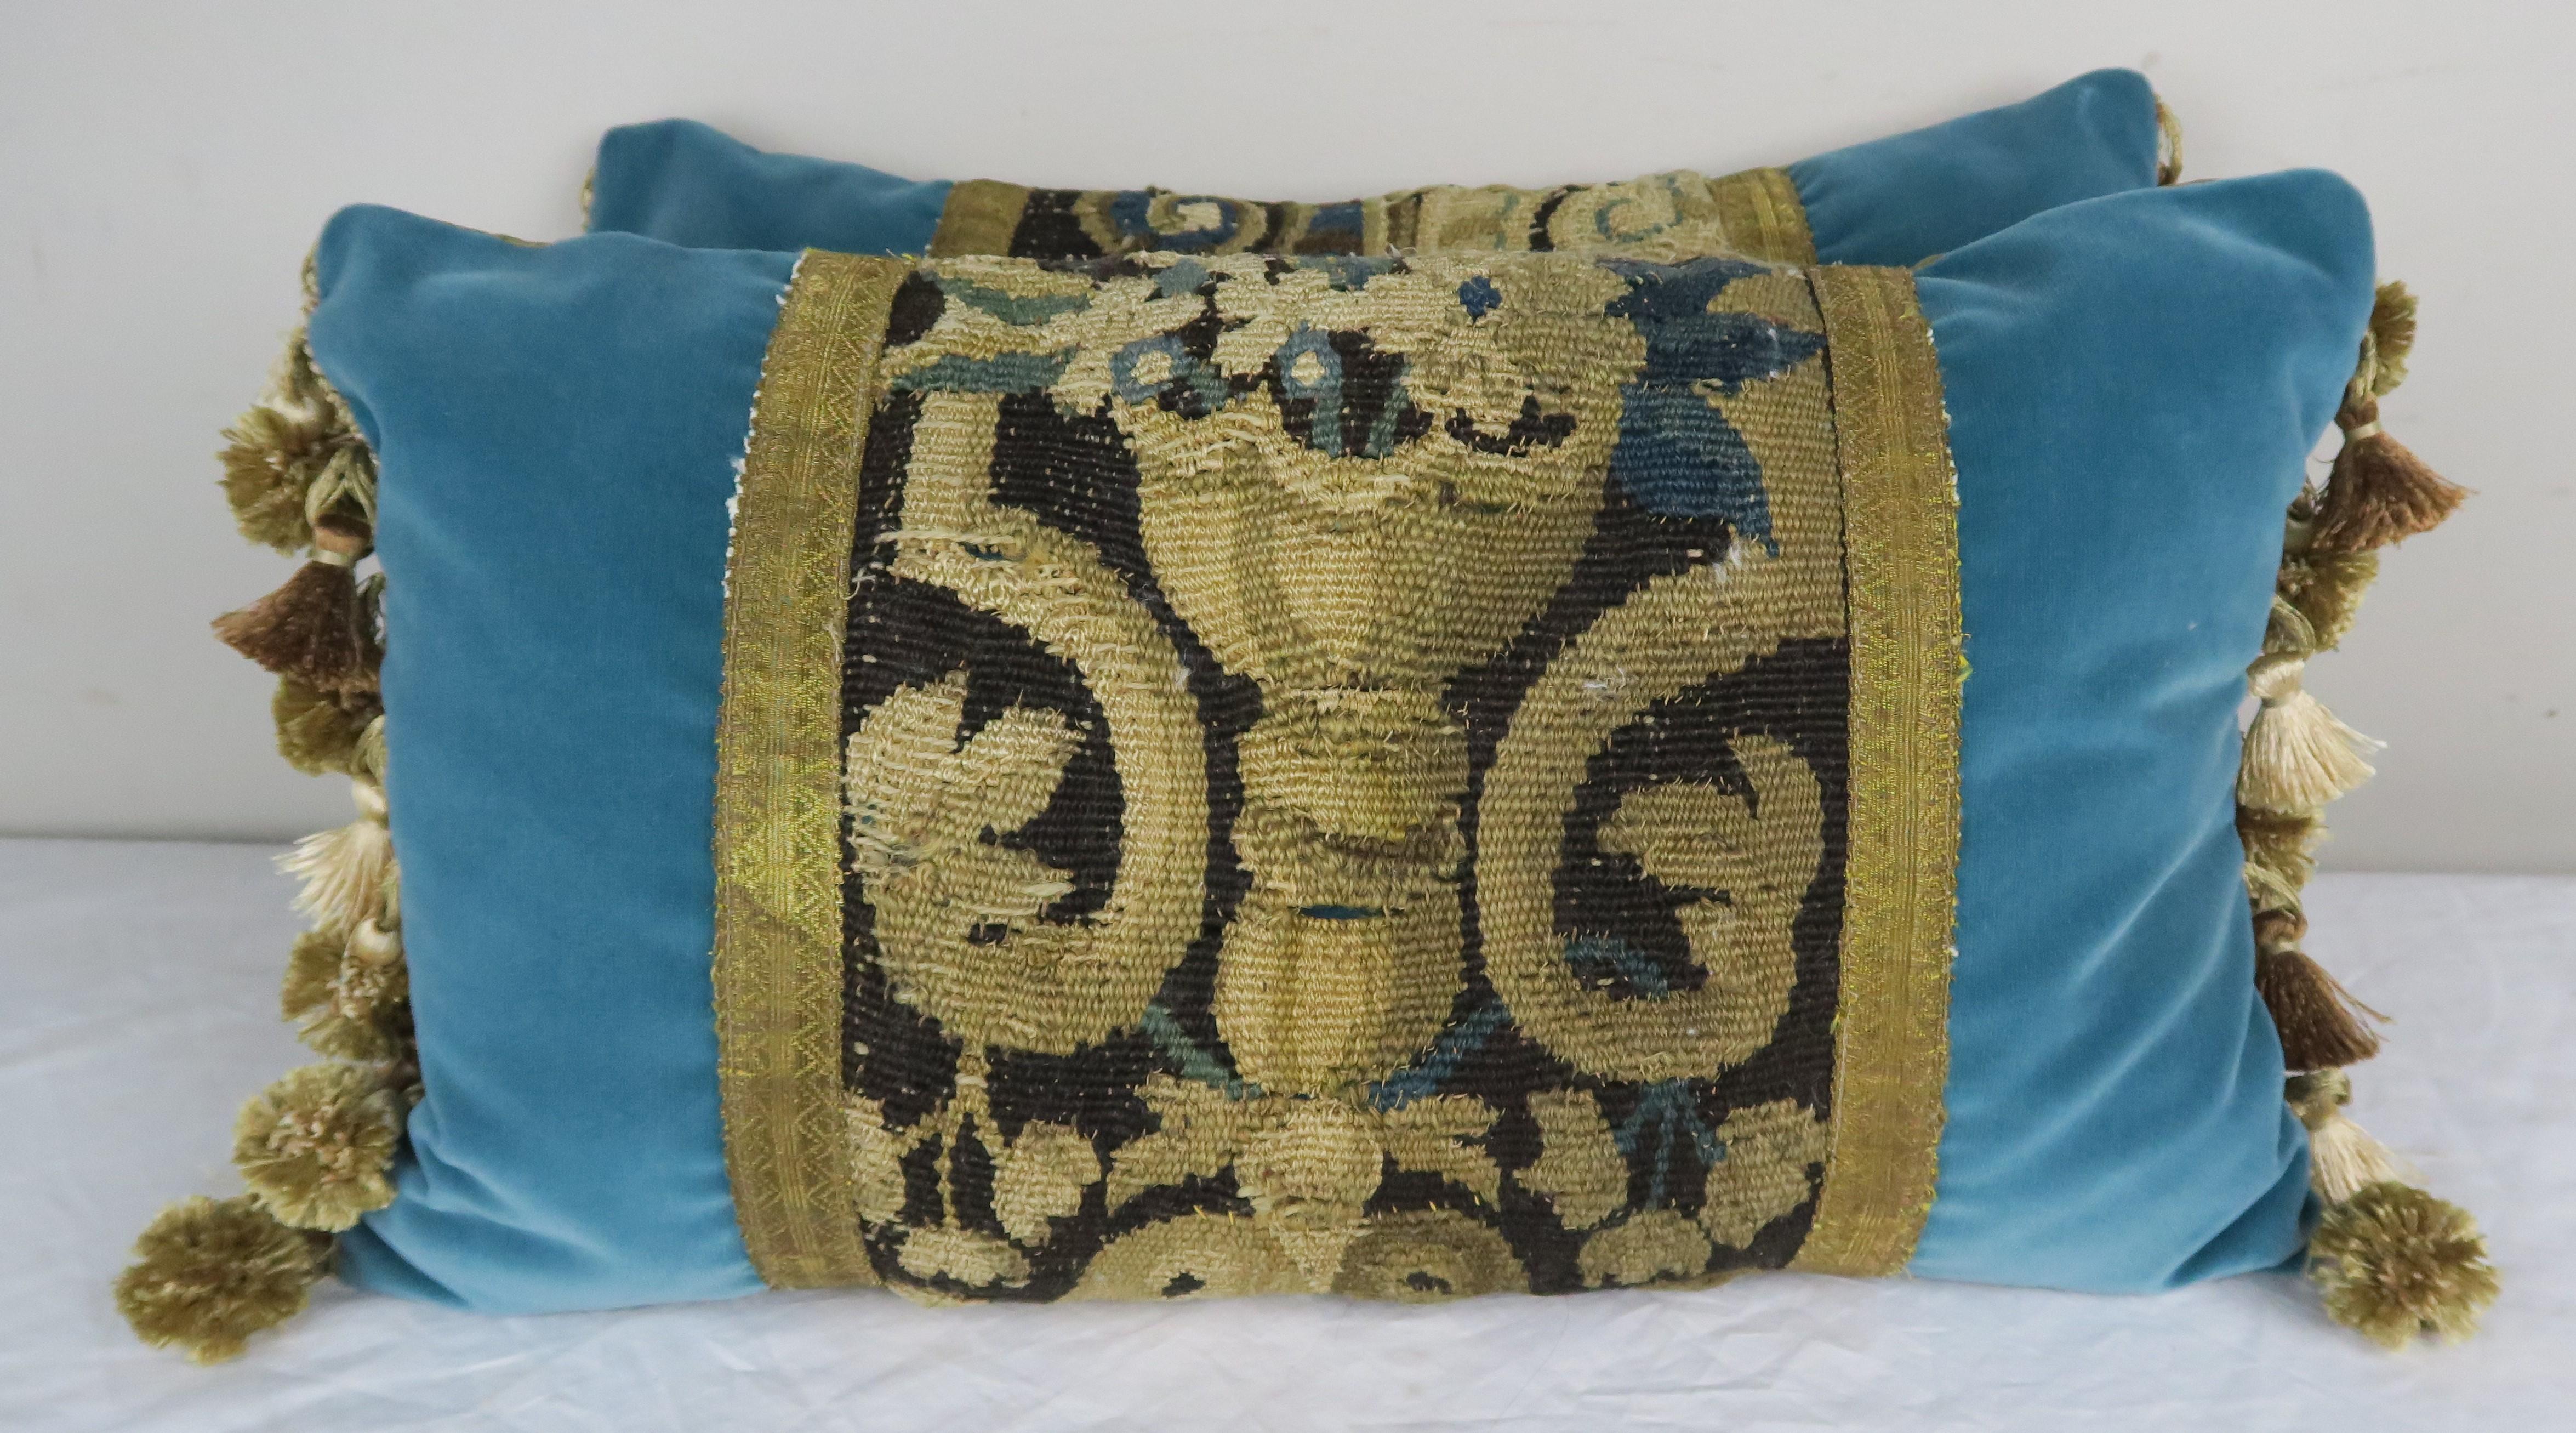 Baroque 18th Century Tapestry Pillows Designed by Melissa Levinson